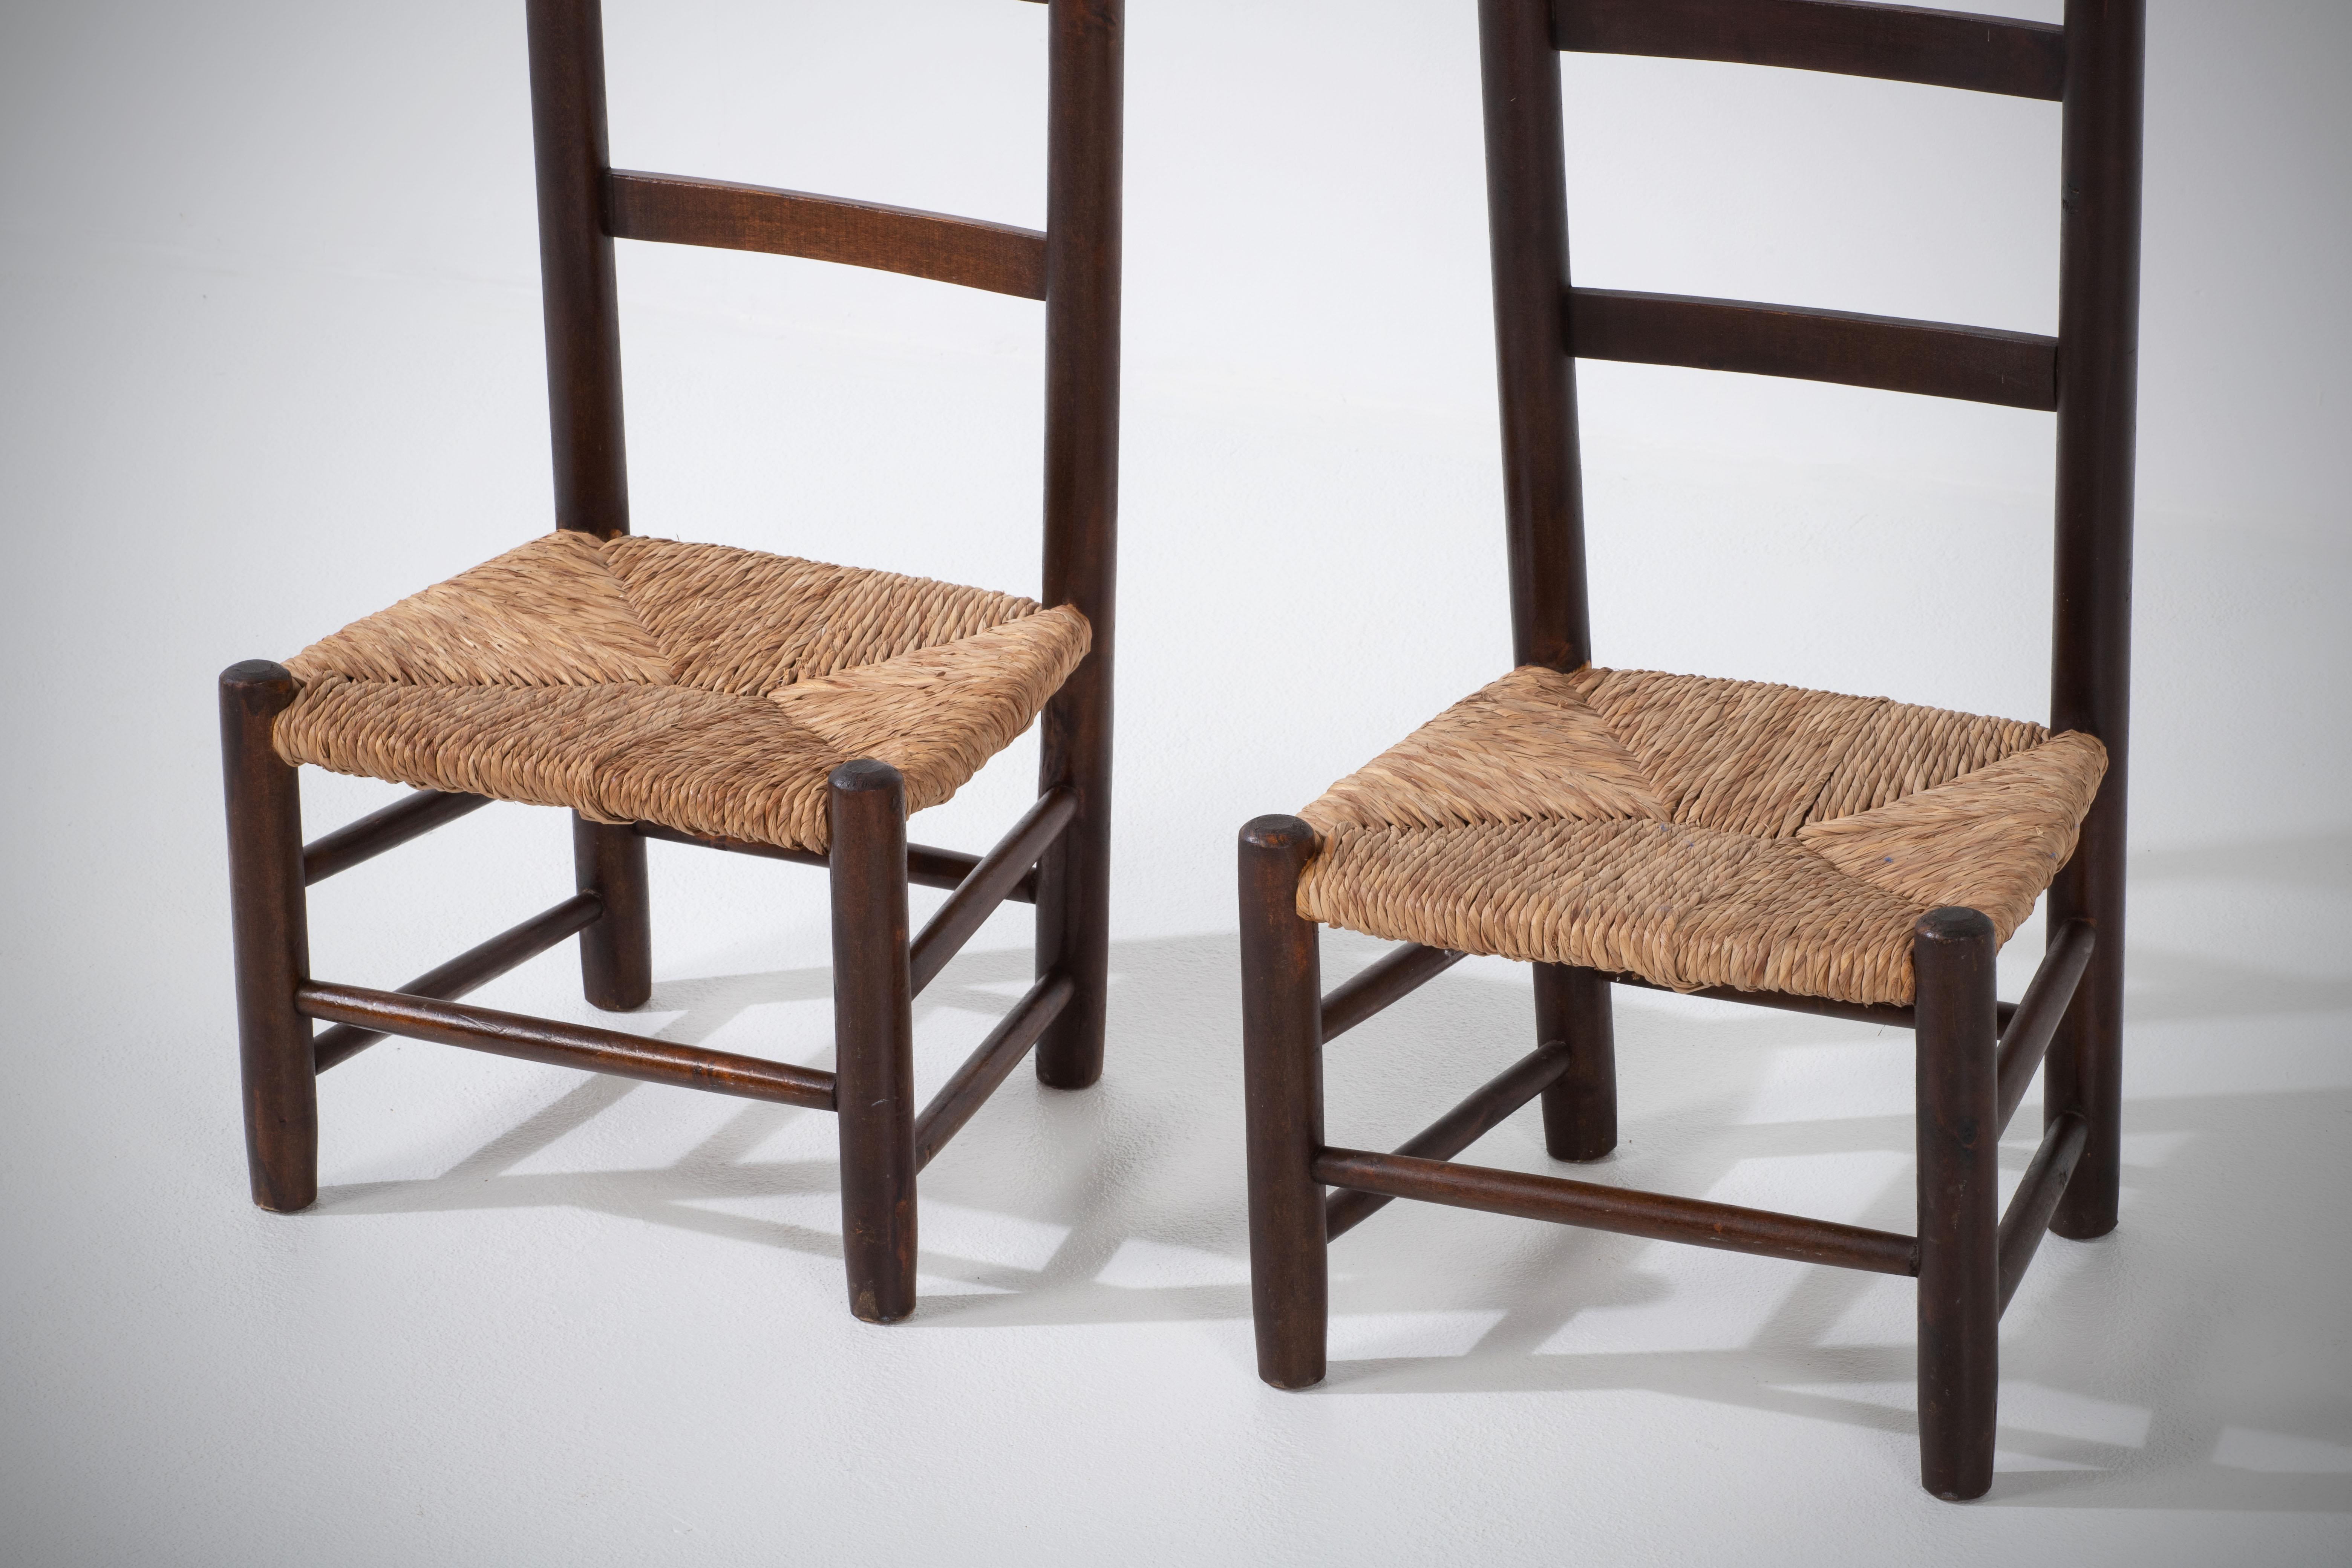 Mid-20th Century Sophisticated Mid-Century Prie Dieu Chairs, aPair For Sale